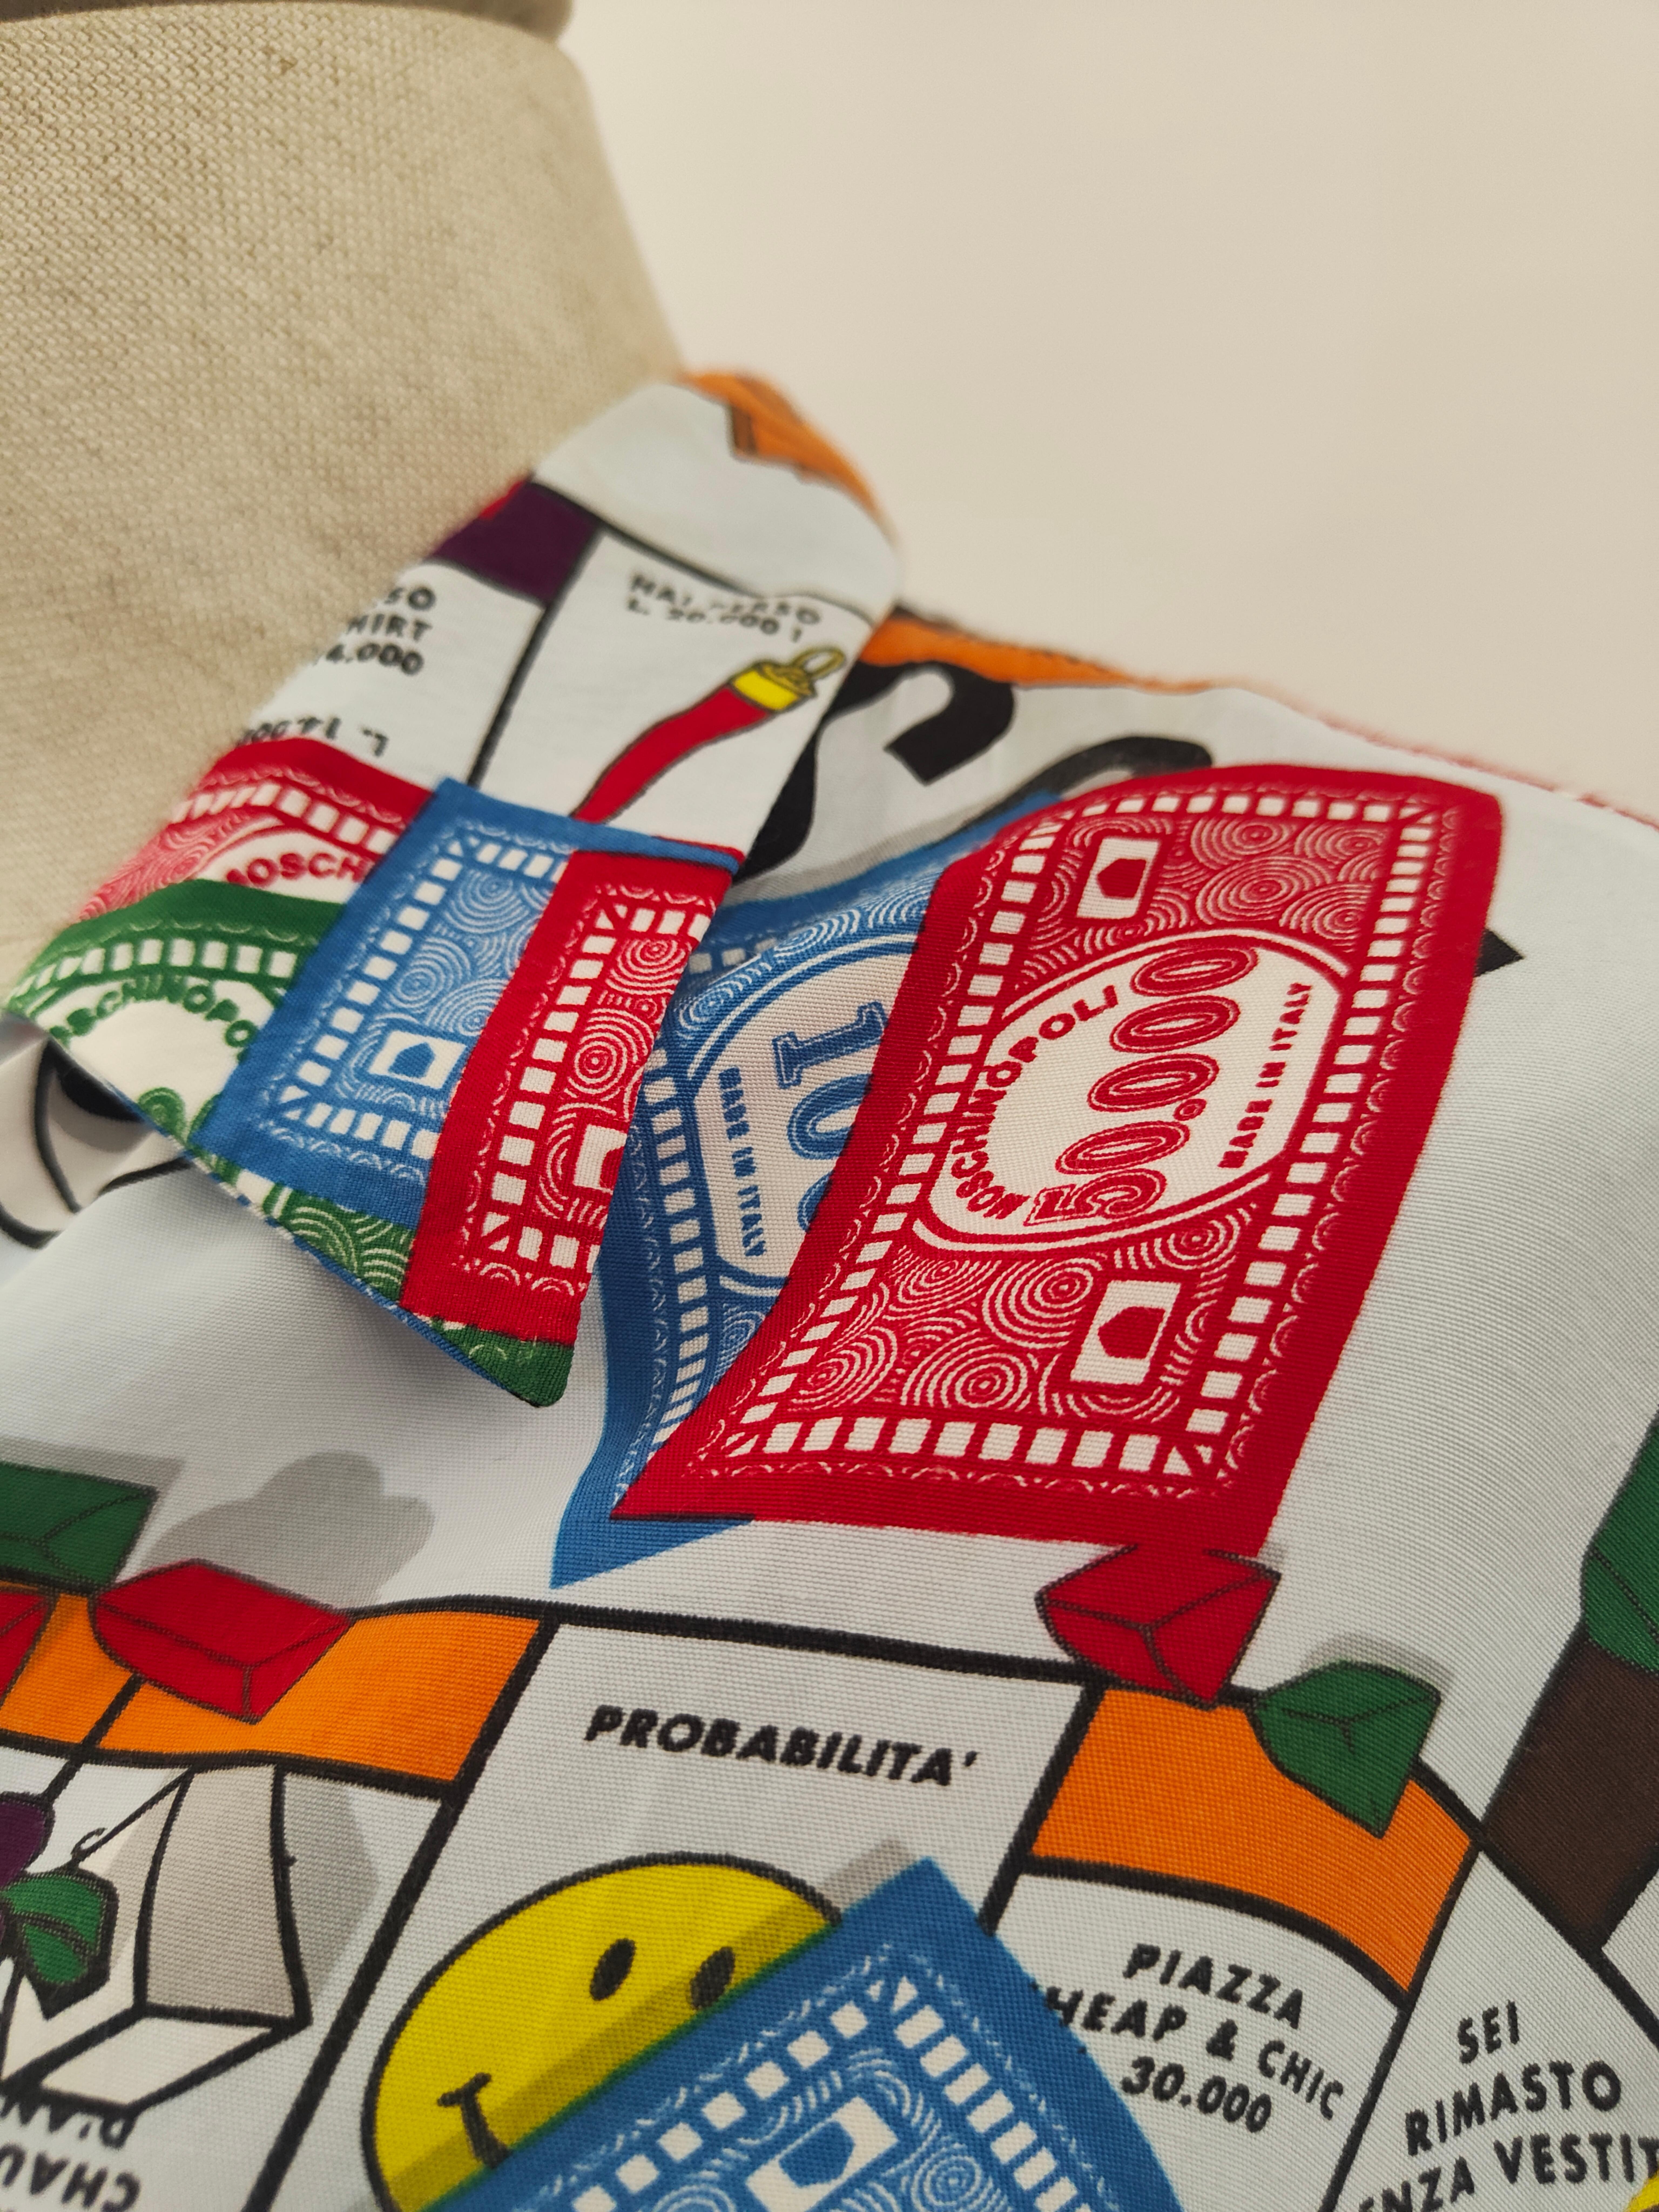 Moschino collection inspired to Monopoli viscose shirt
An iconic and really one of a kind Moschino shirt totally inspired to the famous Monopoli game
Made in italy, in size 42. Composition: Viscose